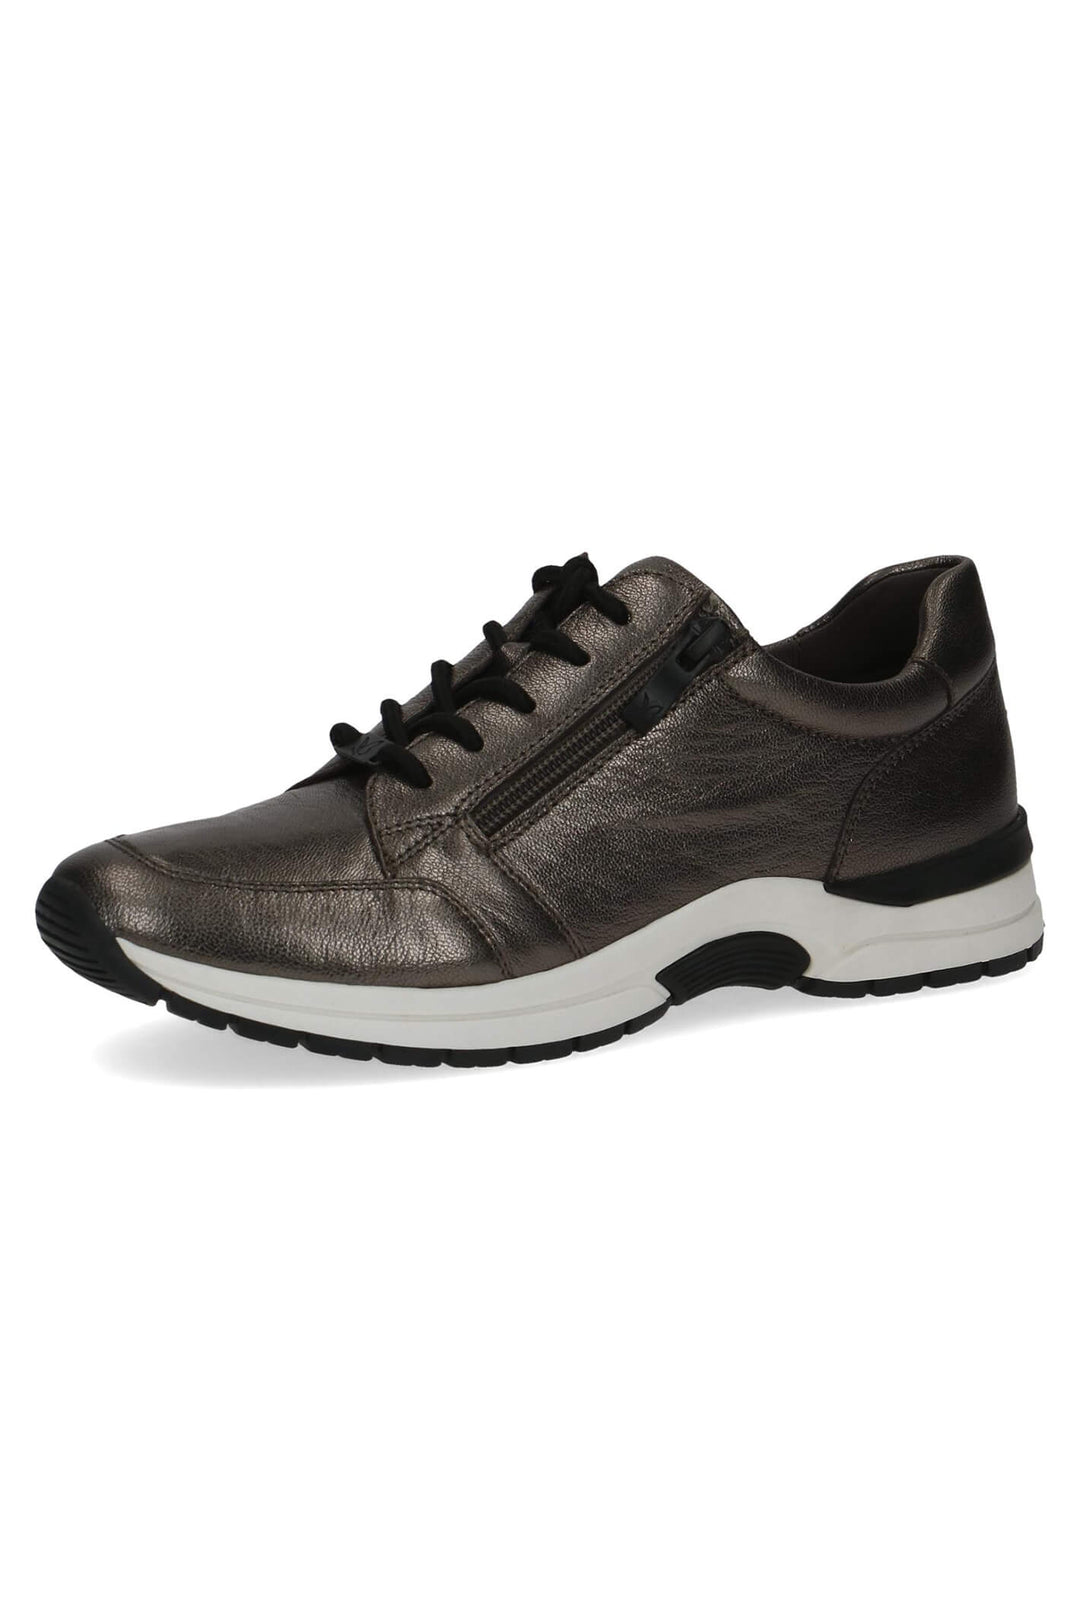 Caprice Lea 23755 Brown Piombo Metallic Leather Trainers - Experience Boutique